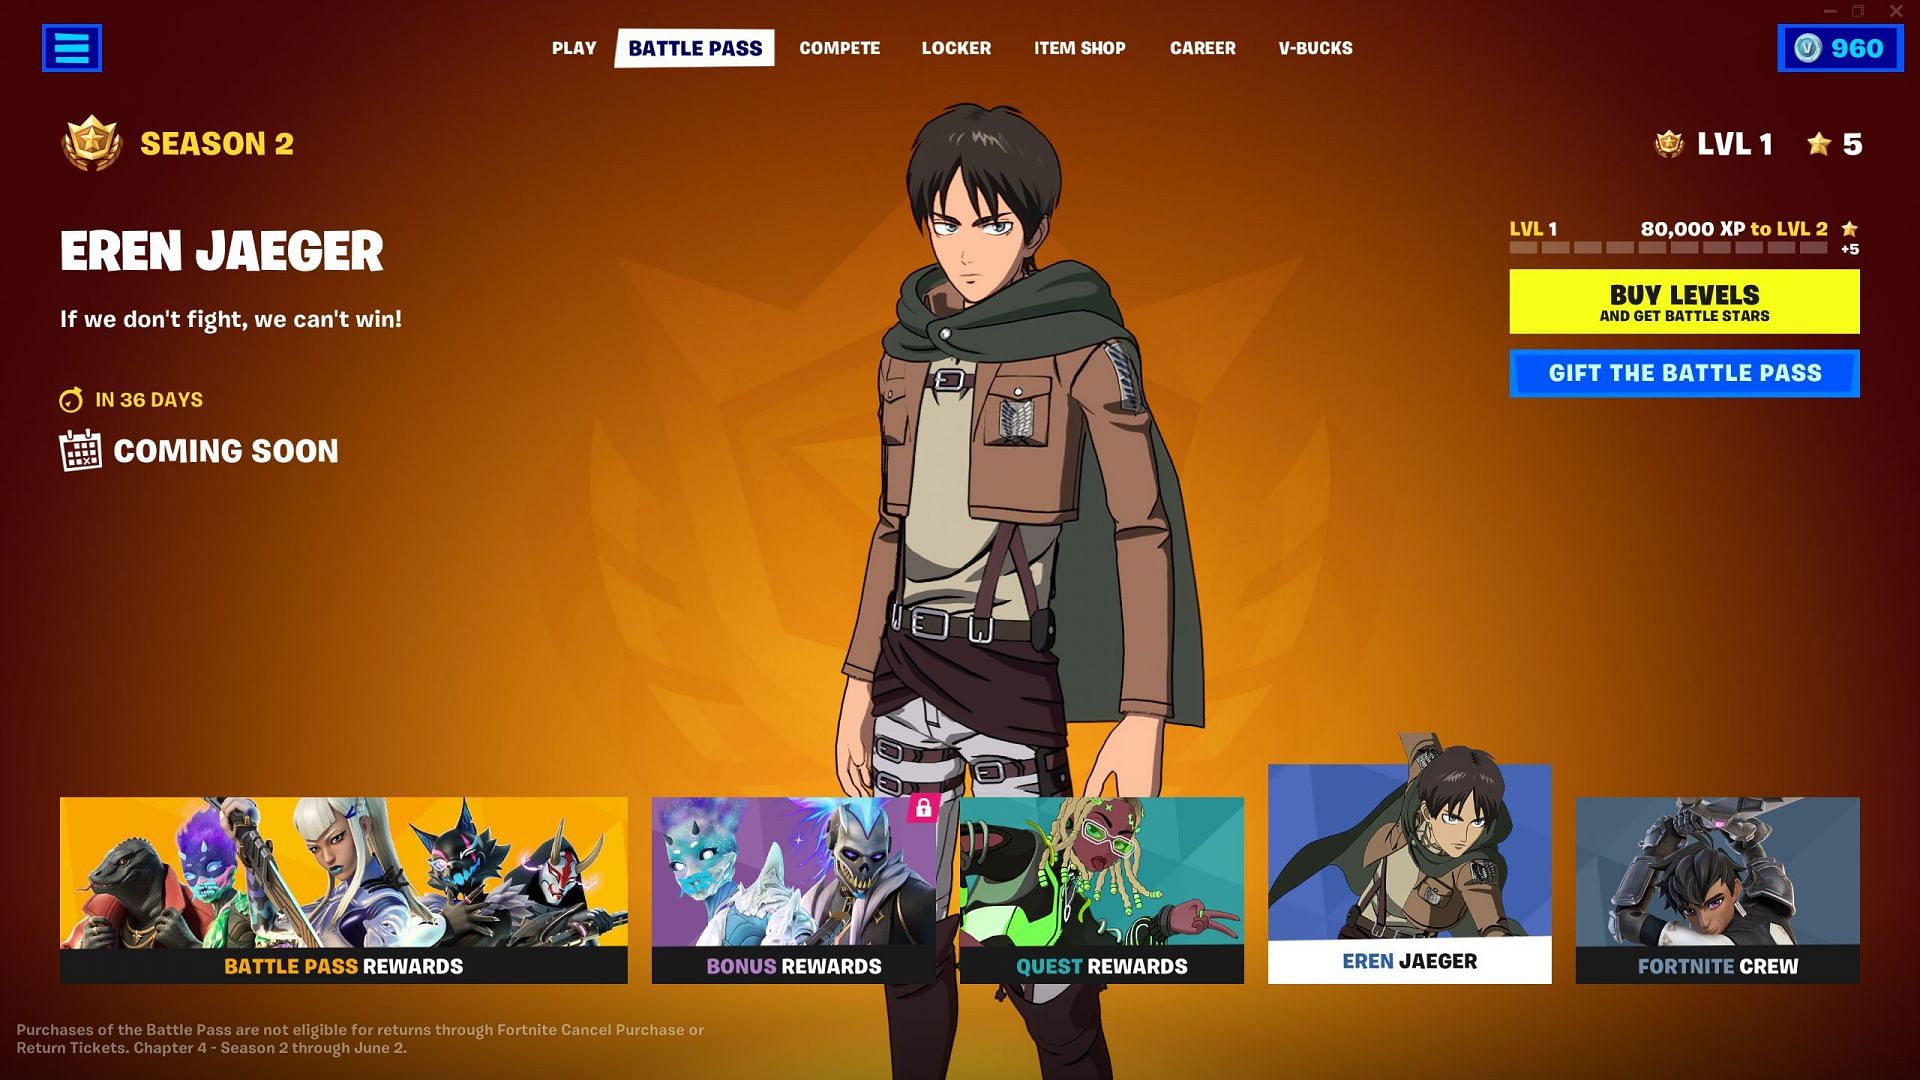 Eren Yeager will be unlockable later in the season (Image via Epic Games)